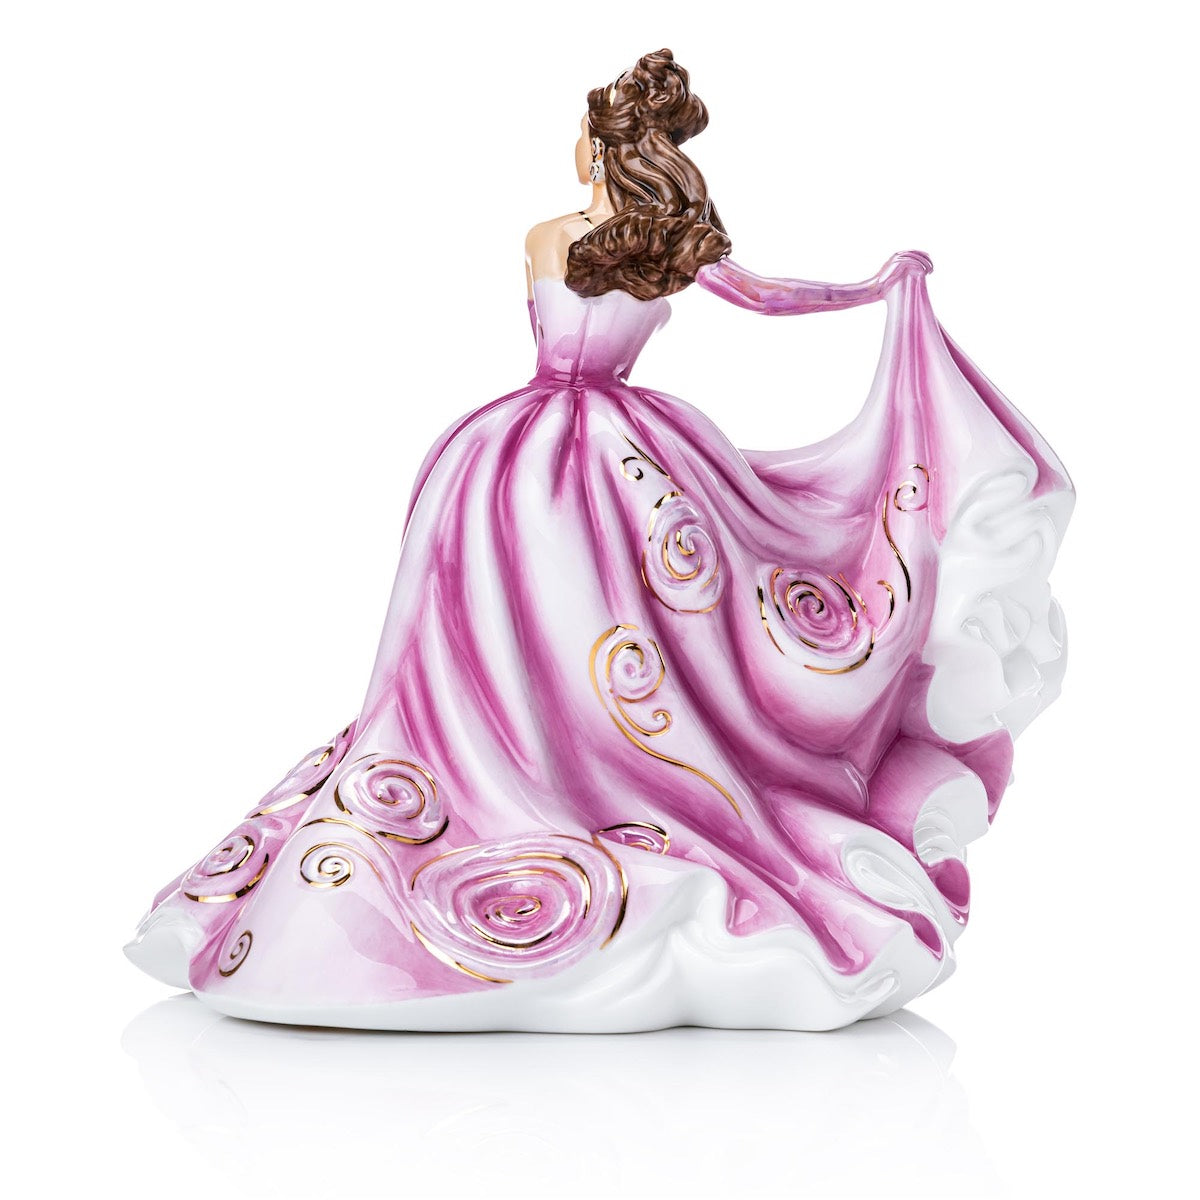 English Ladies Company Sweet Charm NEW  This stunning figurine is a part of the Charm range at English Ladies Co, hand-crafted and hand-painted by our very own Master Painter, Dan Smith. The Sweet Charm figurine is decorated in a beautiful pink colourway and detailed with real gold highlights and Mother of Pearl lustre.